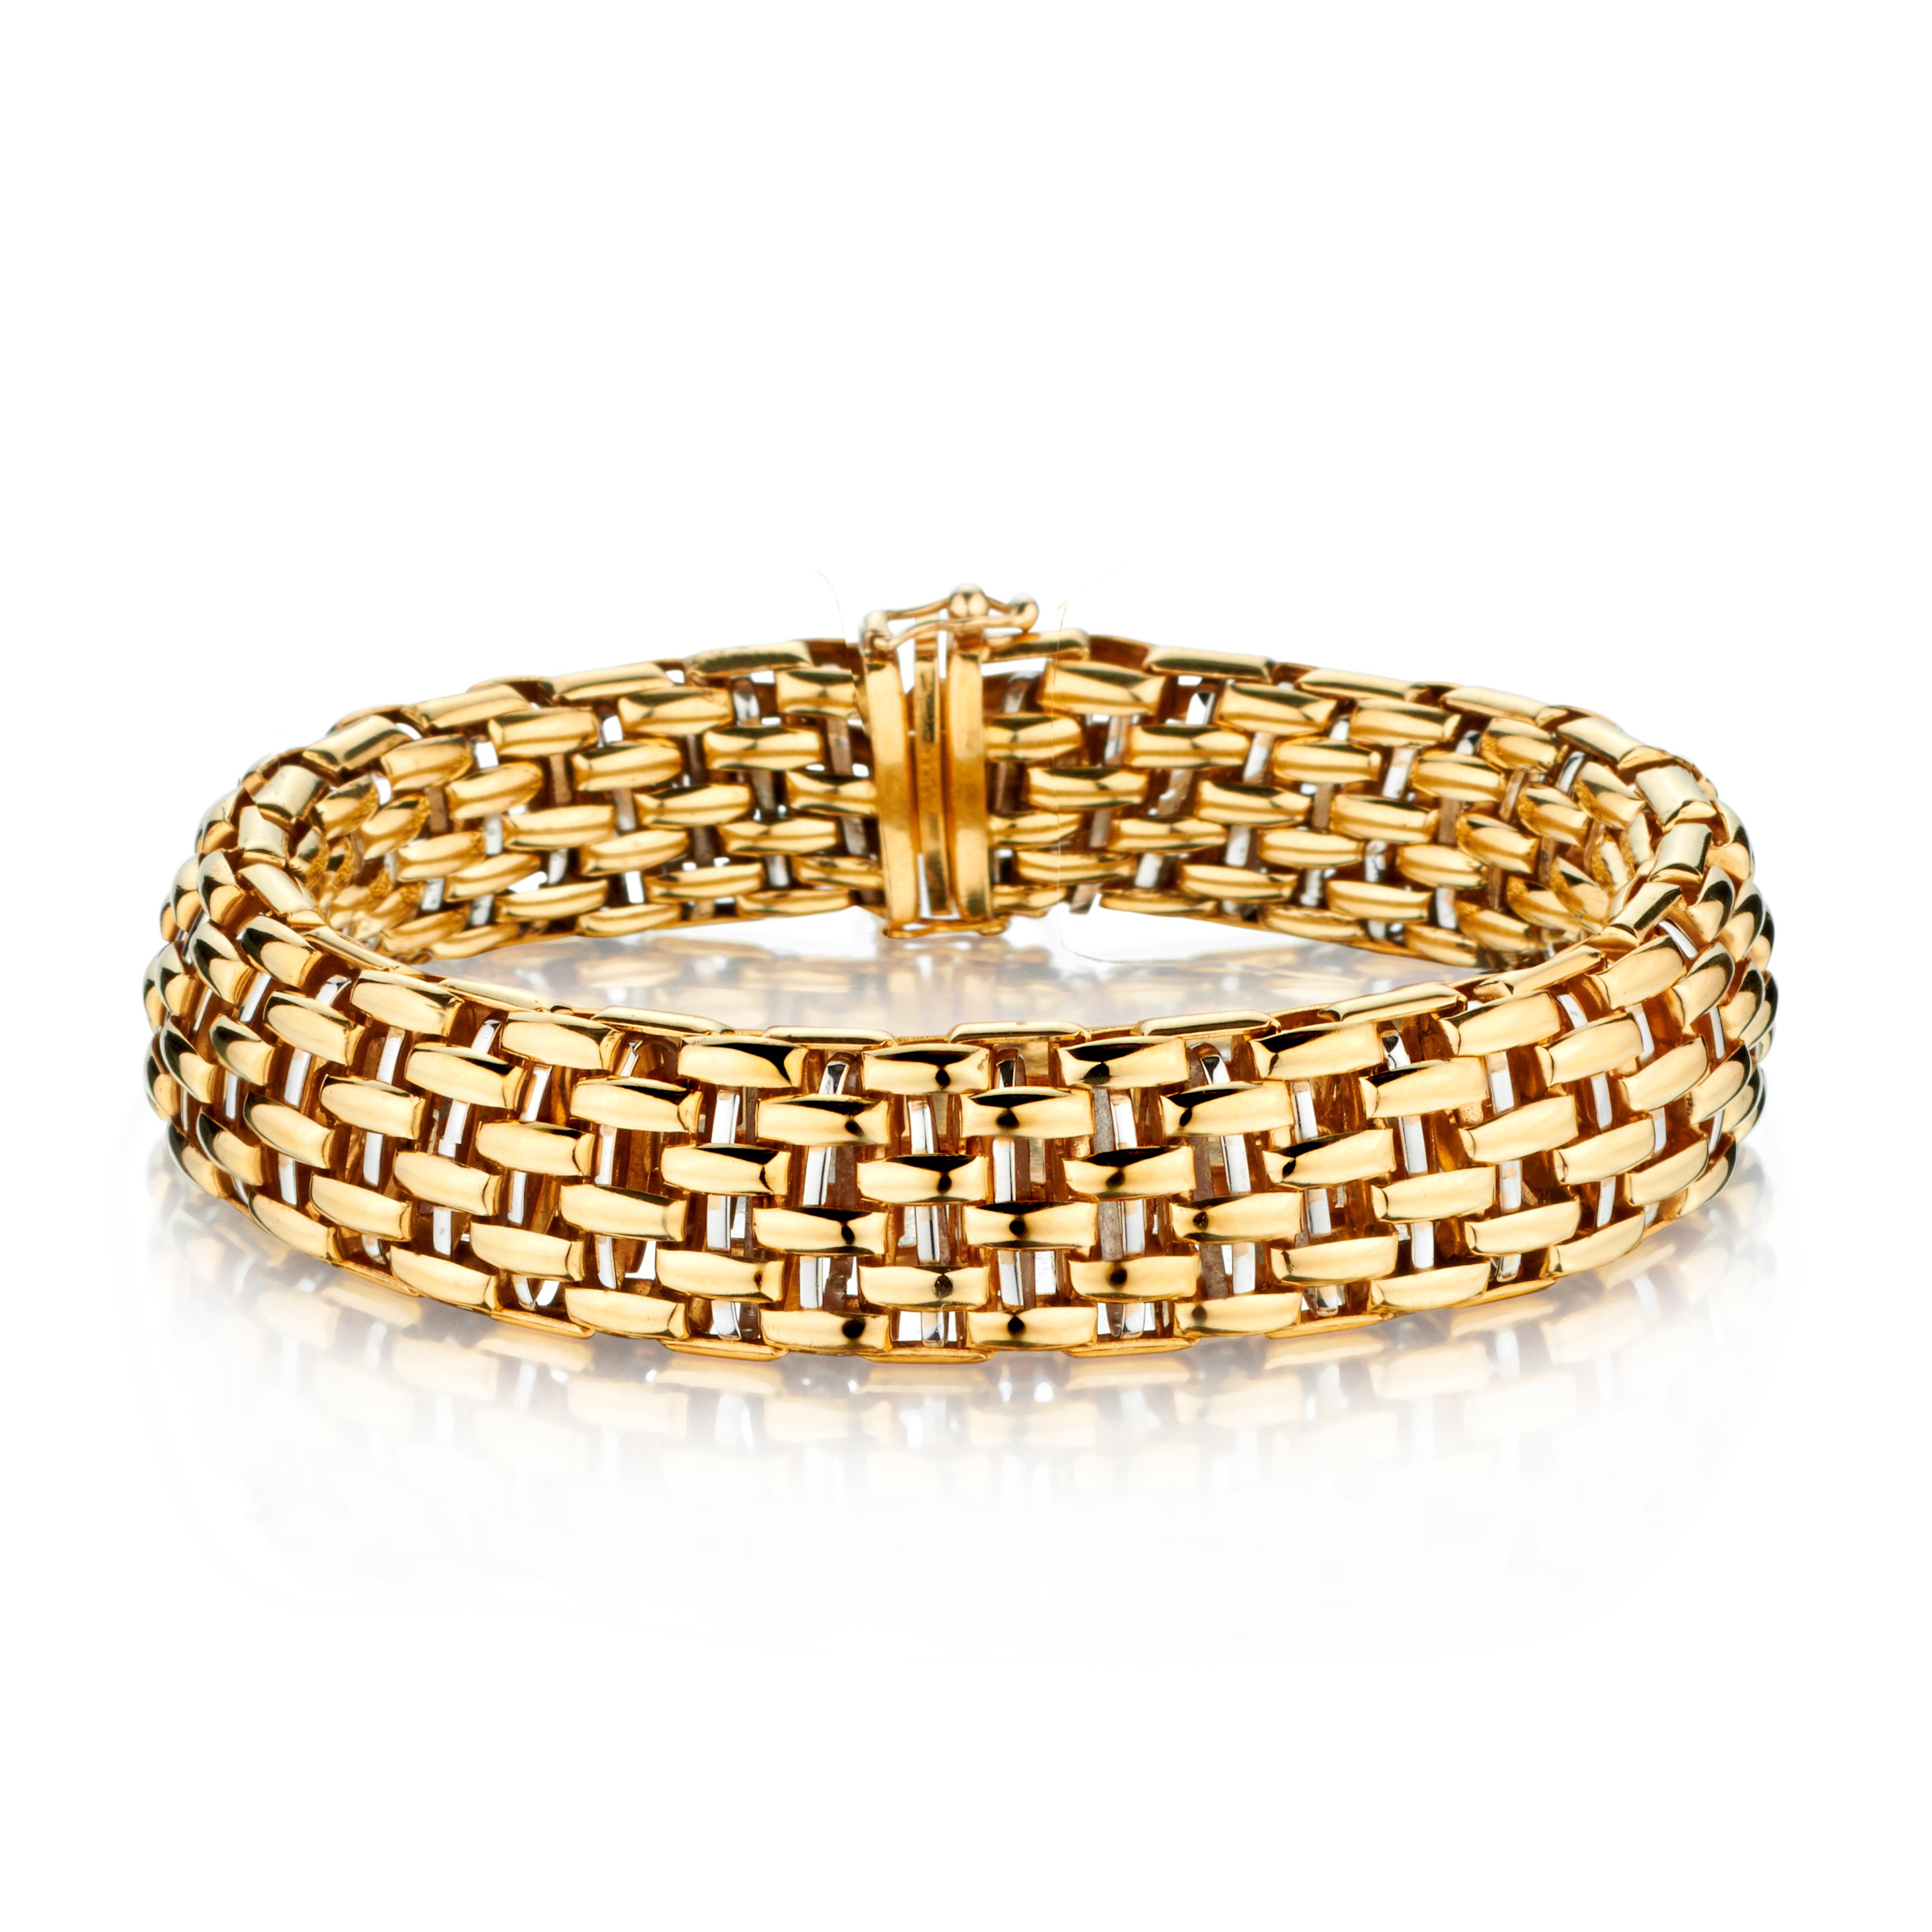 Fope' 18kt Yellow and White Gold Double Sided Bracelet.